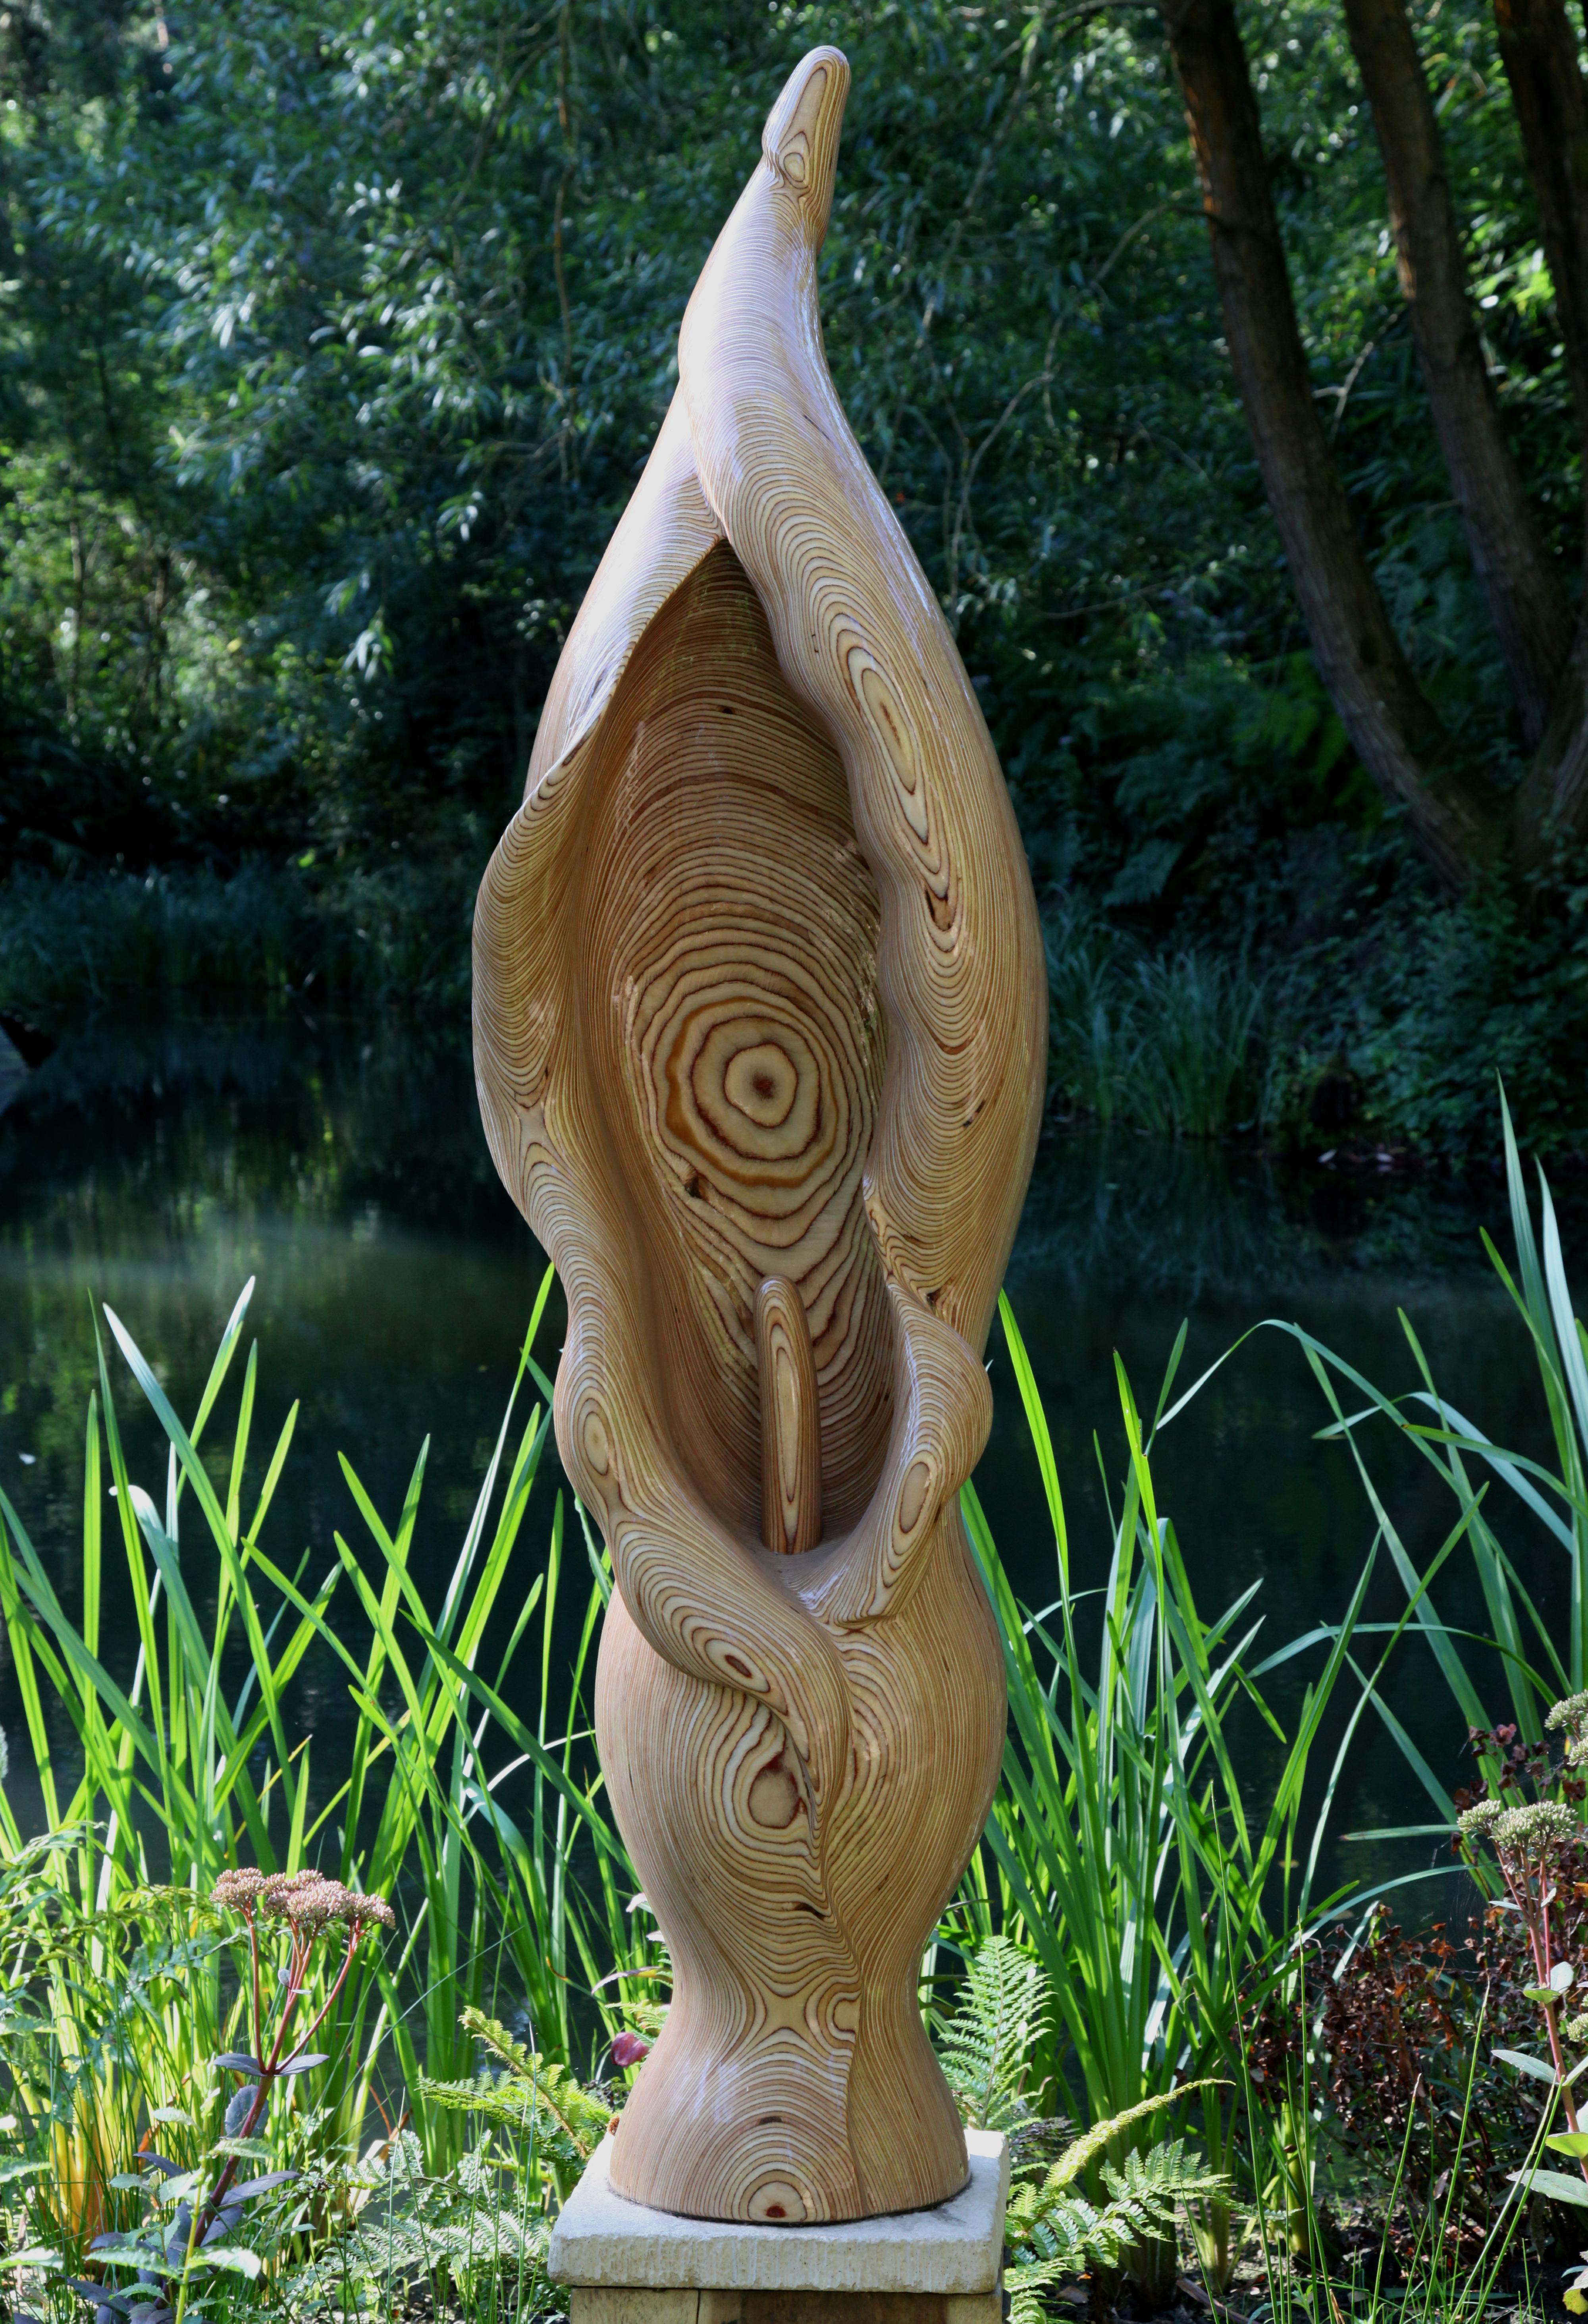 Bill Prickett, Born 1965 Arum Lily Laminated beech Signed Unique 154cm high by 39cm wide by 31cm deep Bill Prickett was born in 1965 in Kent, UK. ...